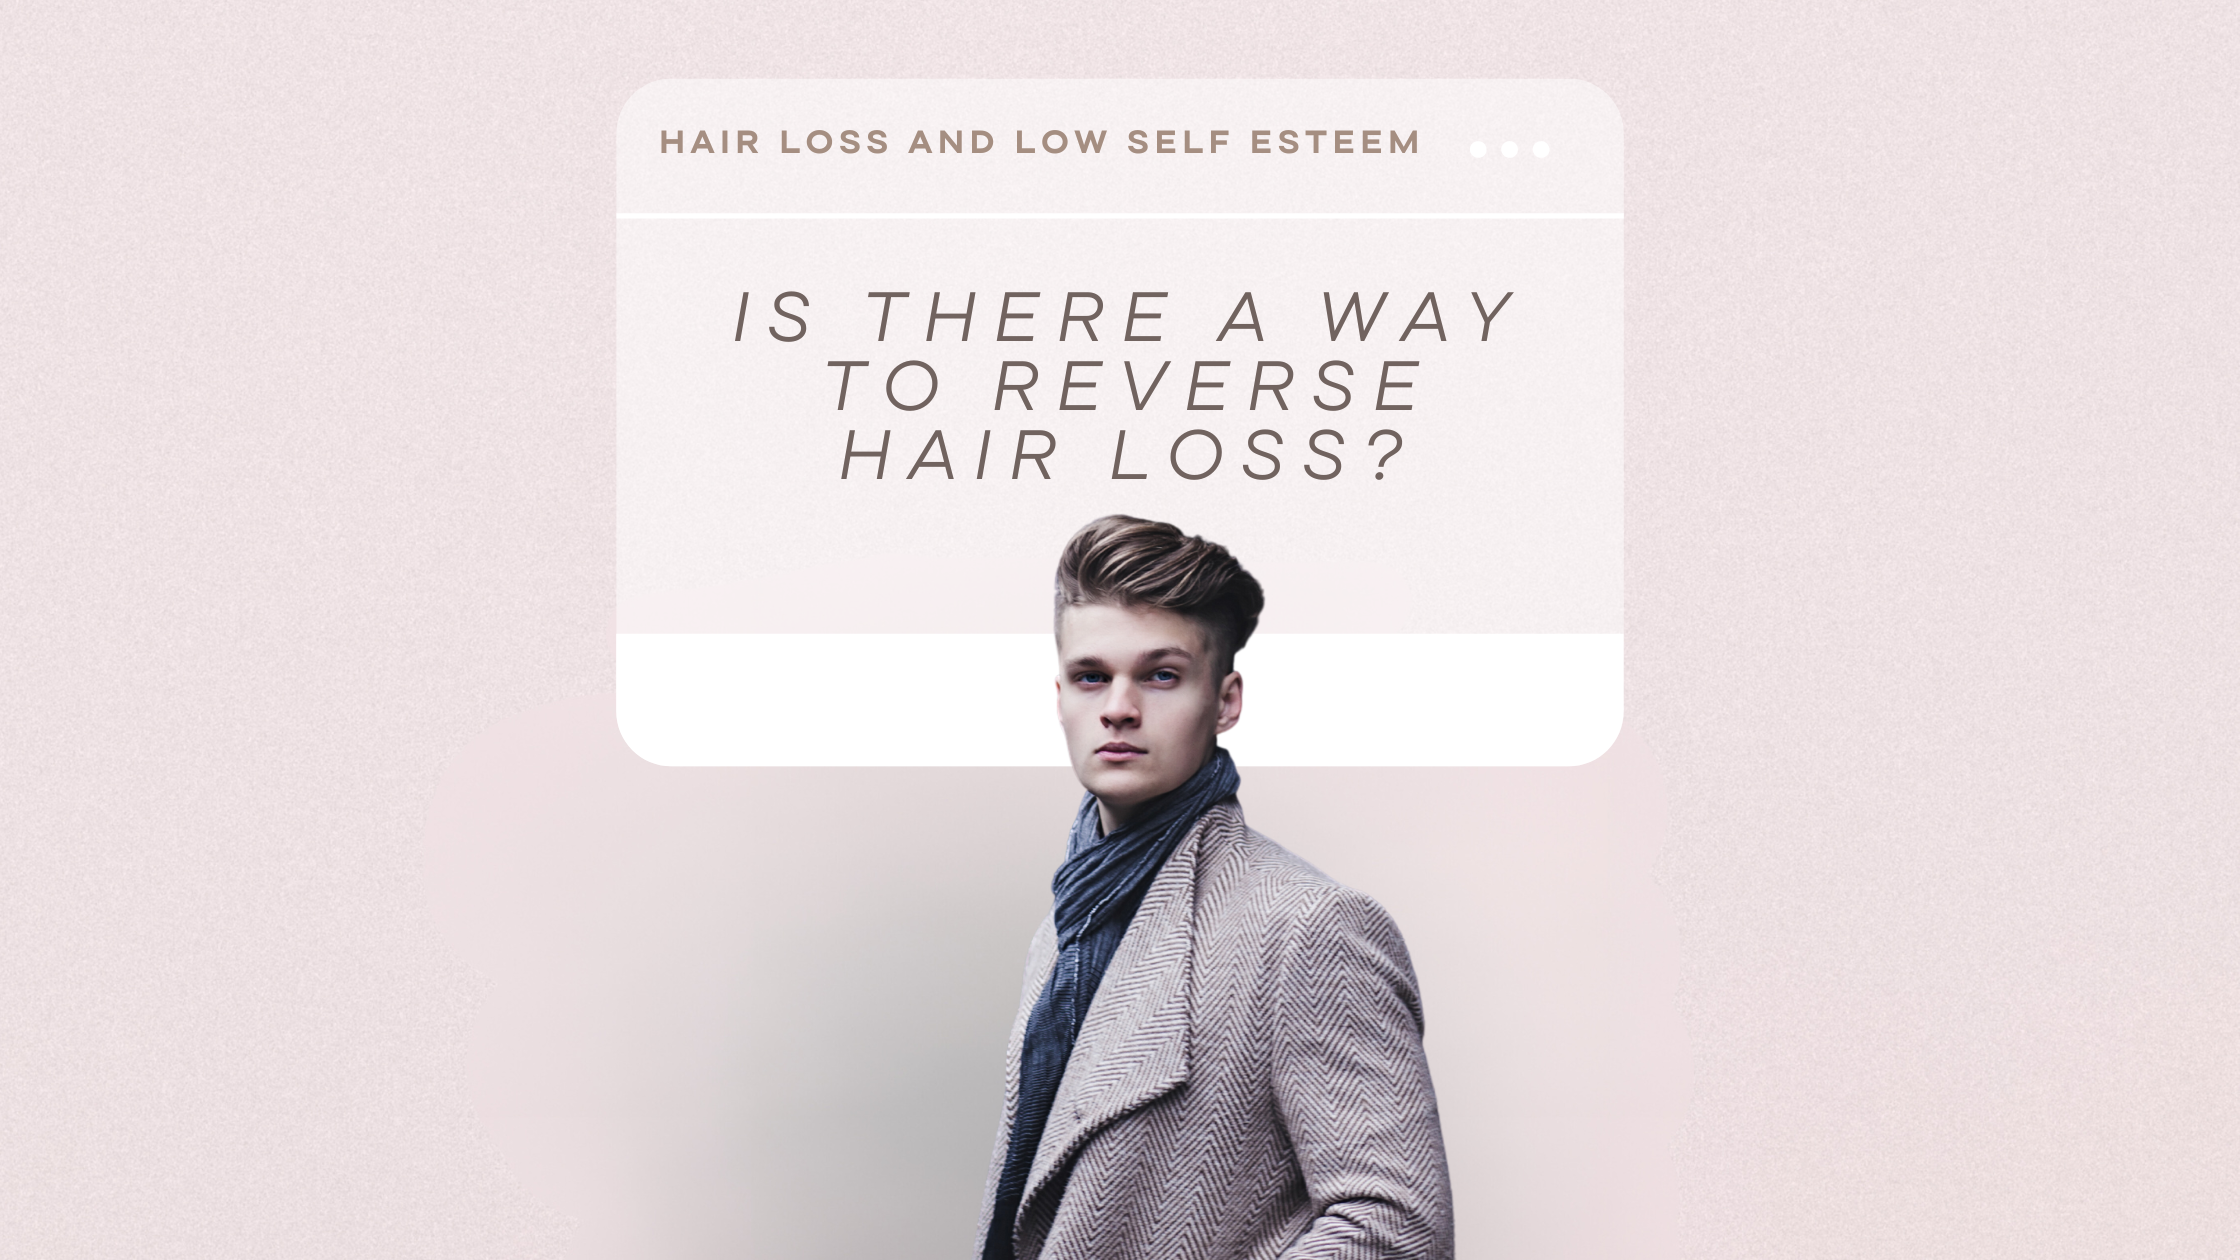 Hair Loss and Low Self-Esteem: Is There a Way to Reverse Hair Loss?